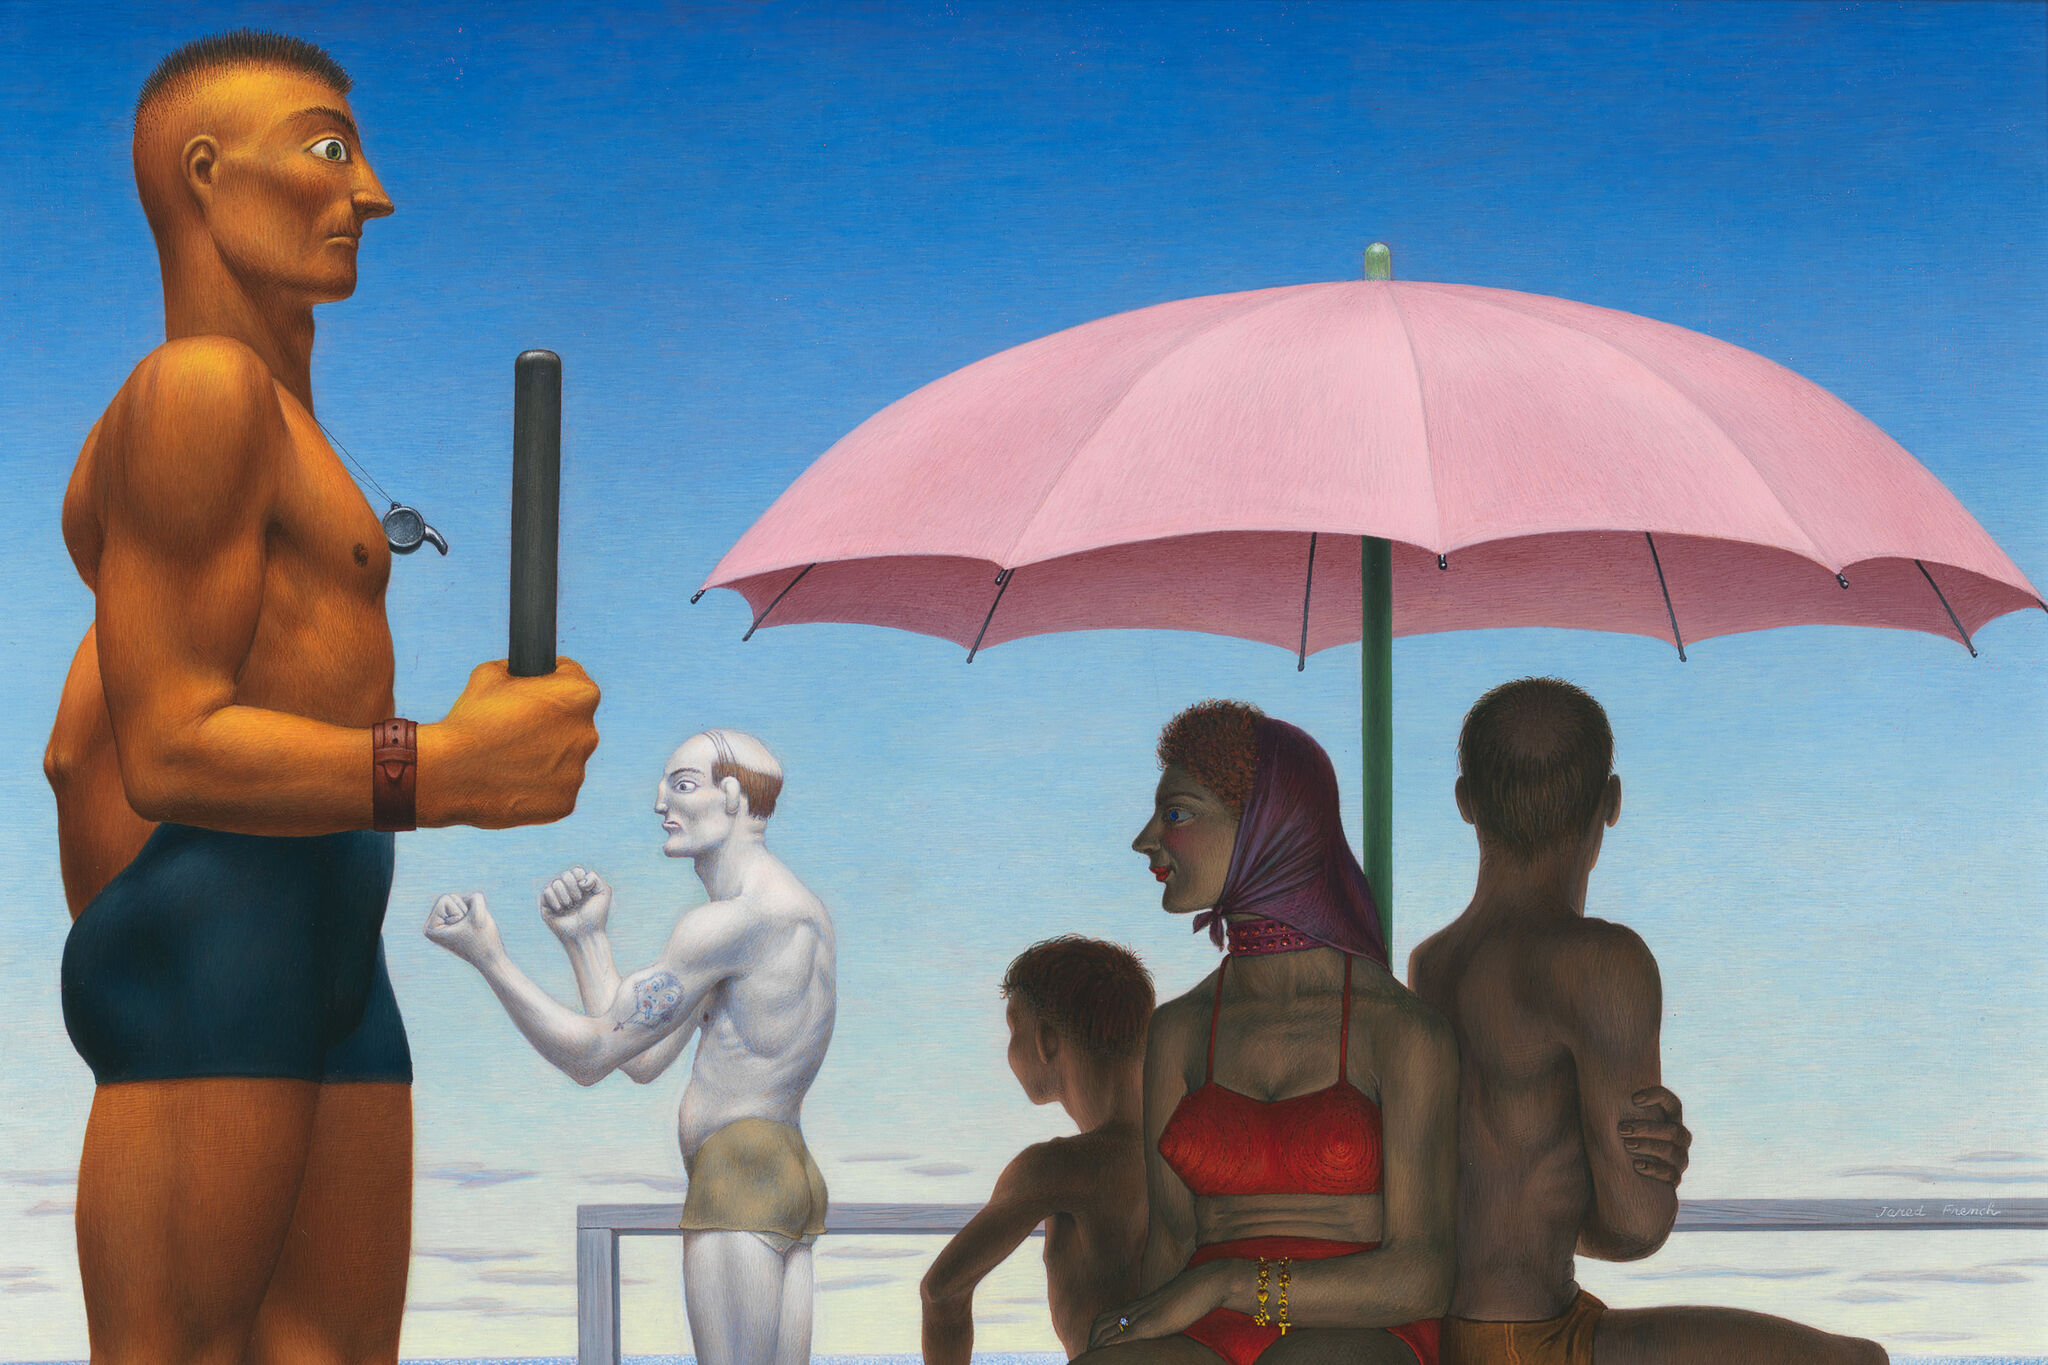 In the middle ground, a man, woman and child sit stiffly in swim attire under a small umbrella on a deck with an empty beach behind them. In the foreground, a muscular male figure wearing only tight swim trunks and a whistle around his neck, holds up a baton, and behind them, a pale, gaunt male figure passes by. 